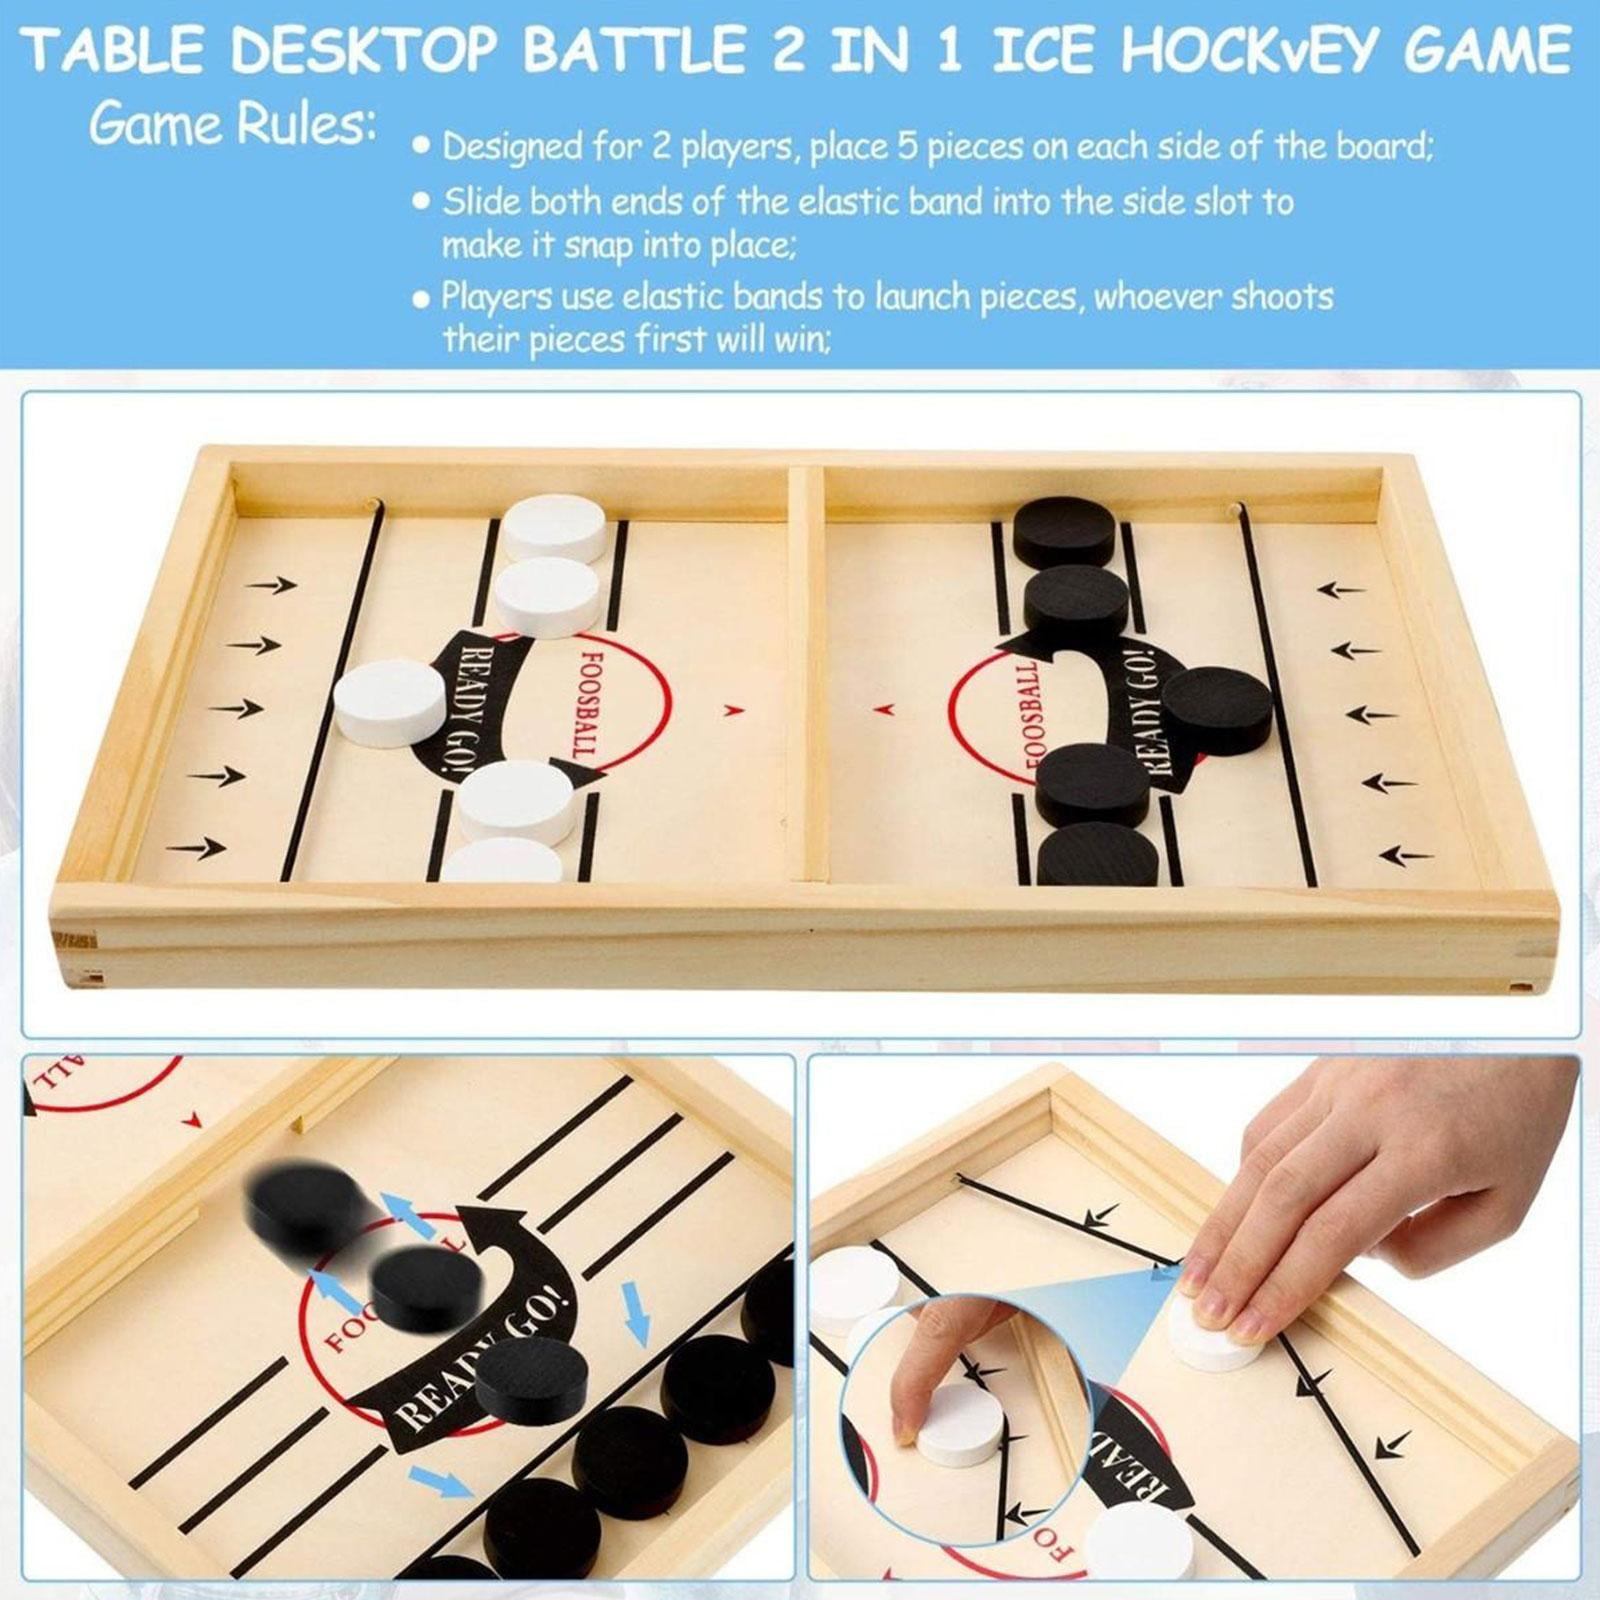  Sling Puck Game, Chess Game Set, Fast Sling Puck Game with  Chess Game, 2 in 1 Board Game Set, Large Size 22.7 in x 12.5 in, Wooden  Hockey Table Game : Toys & Games